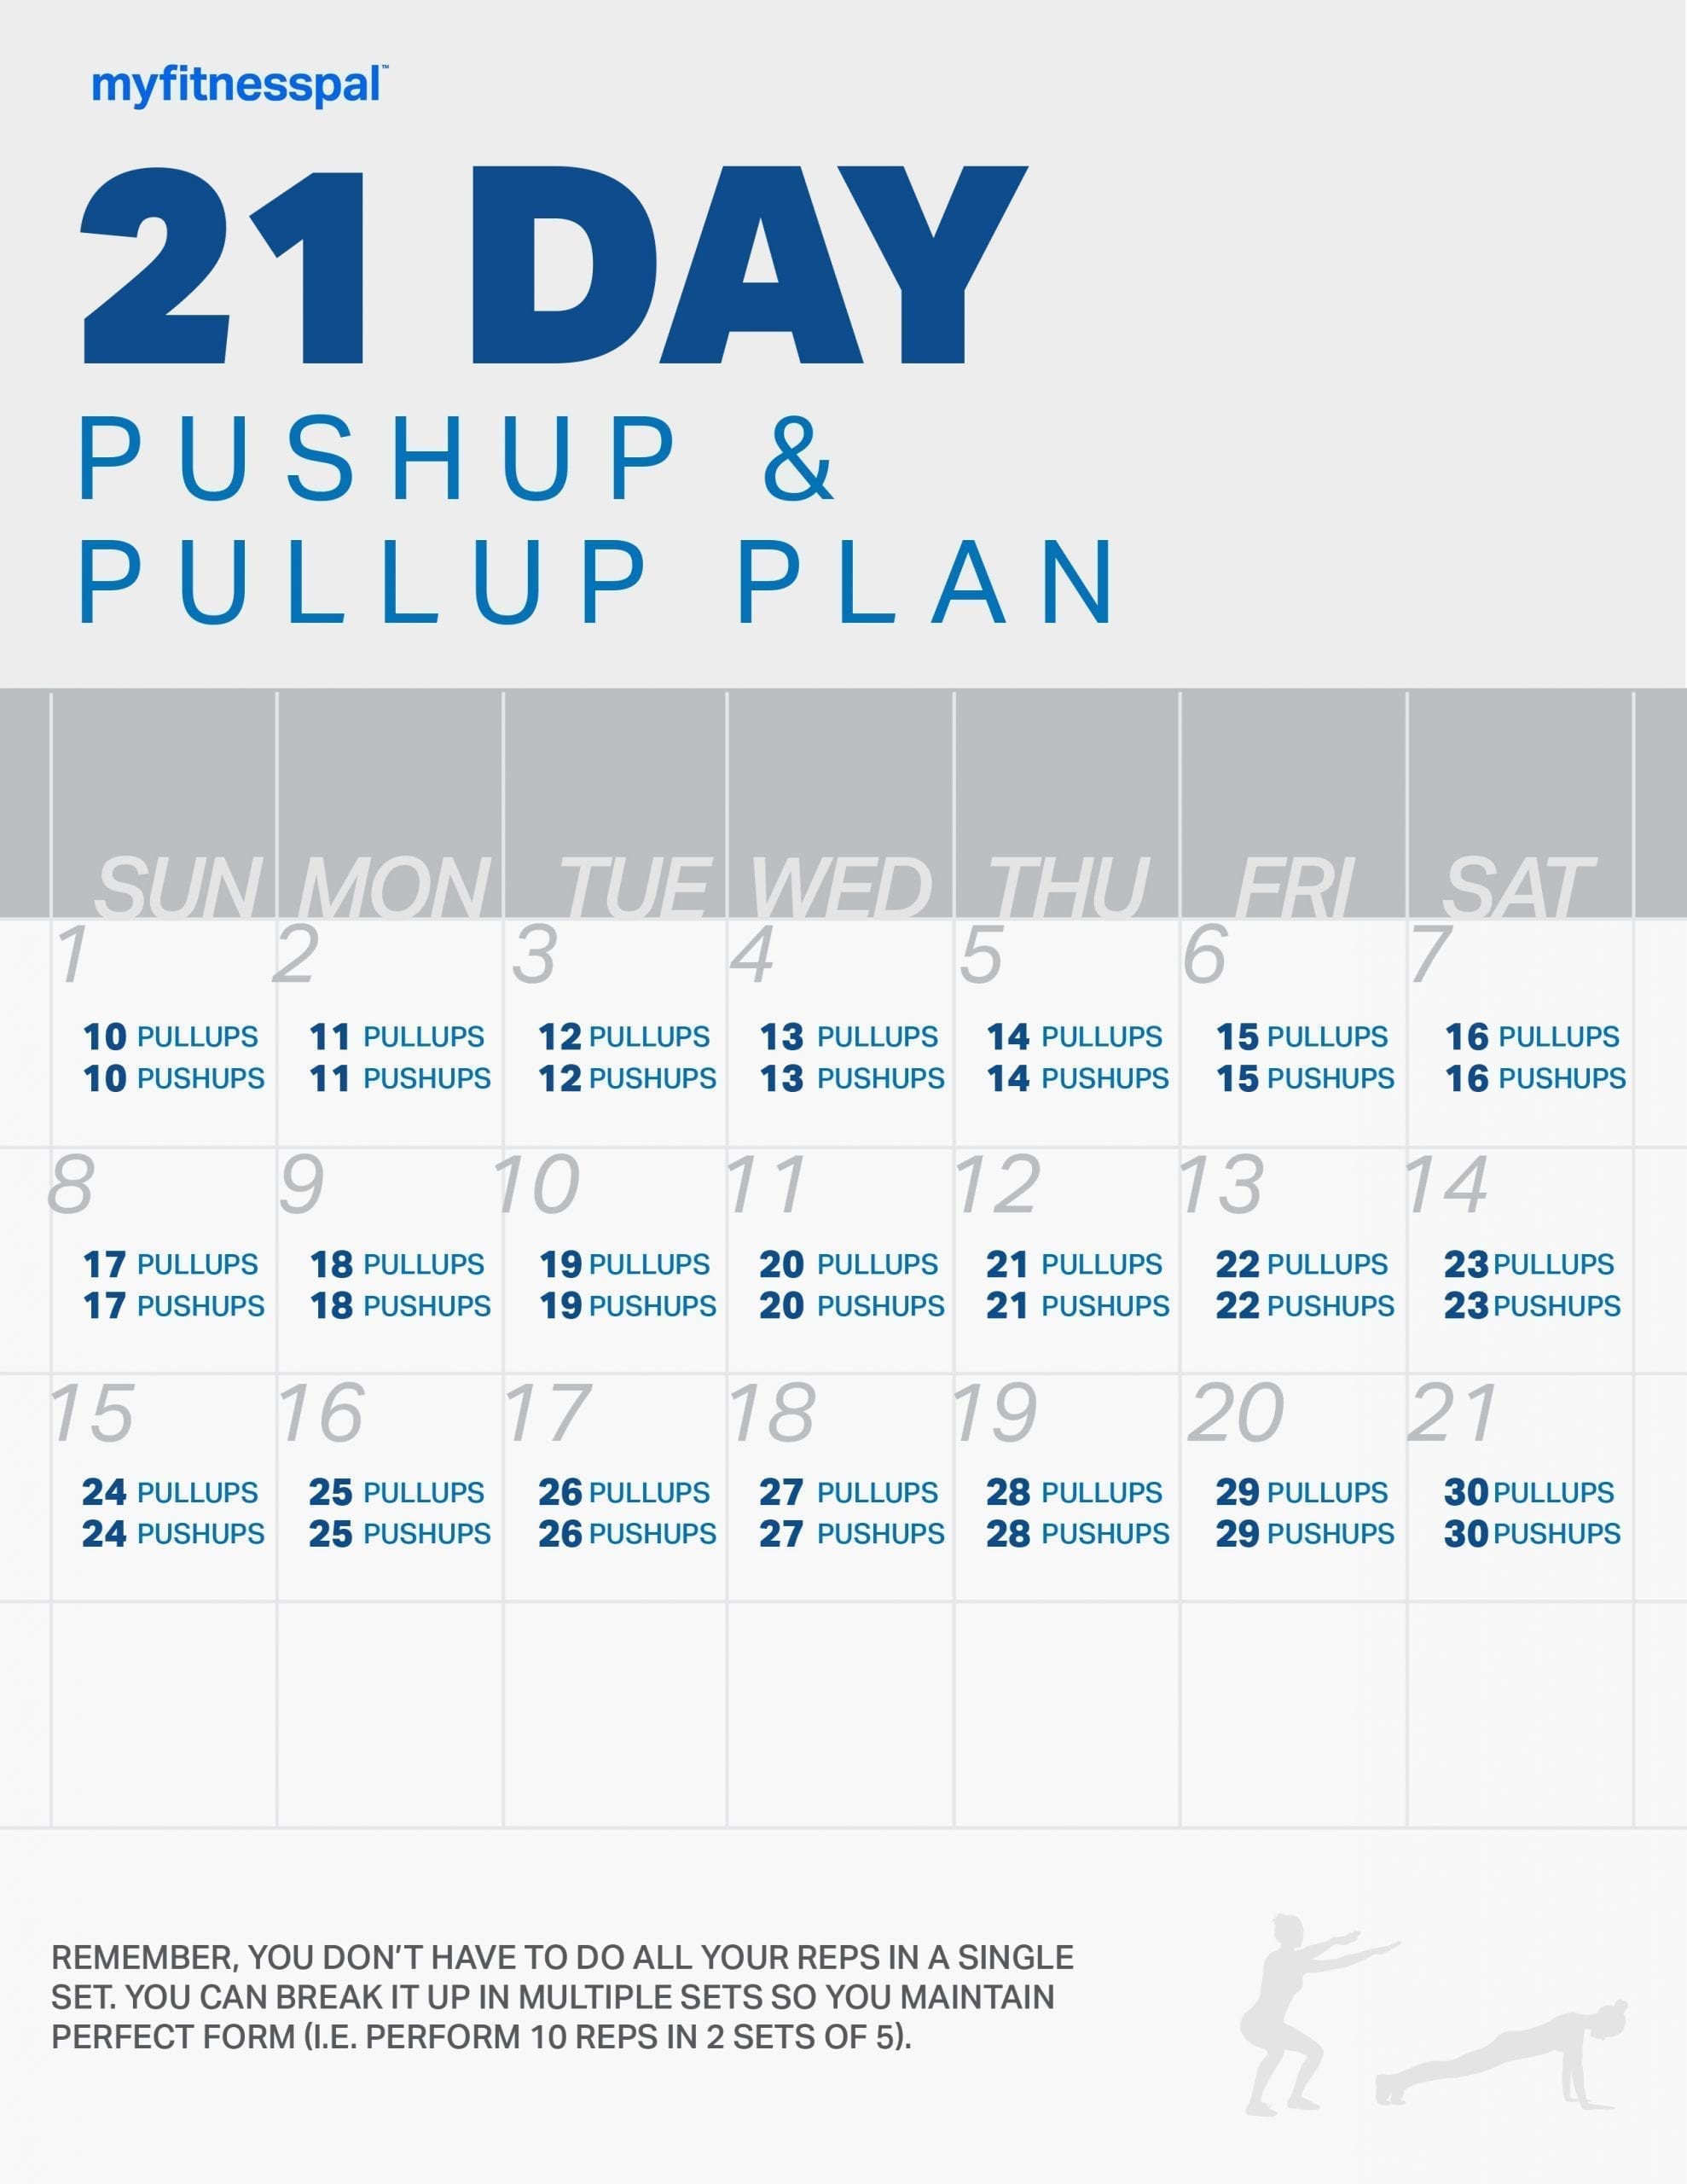 The 21 Day Pushup and Pullup Plan Fitness MyFitnessPal